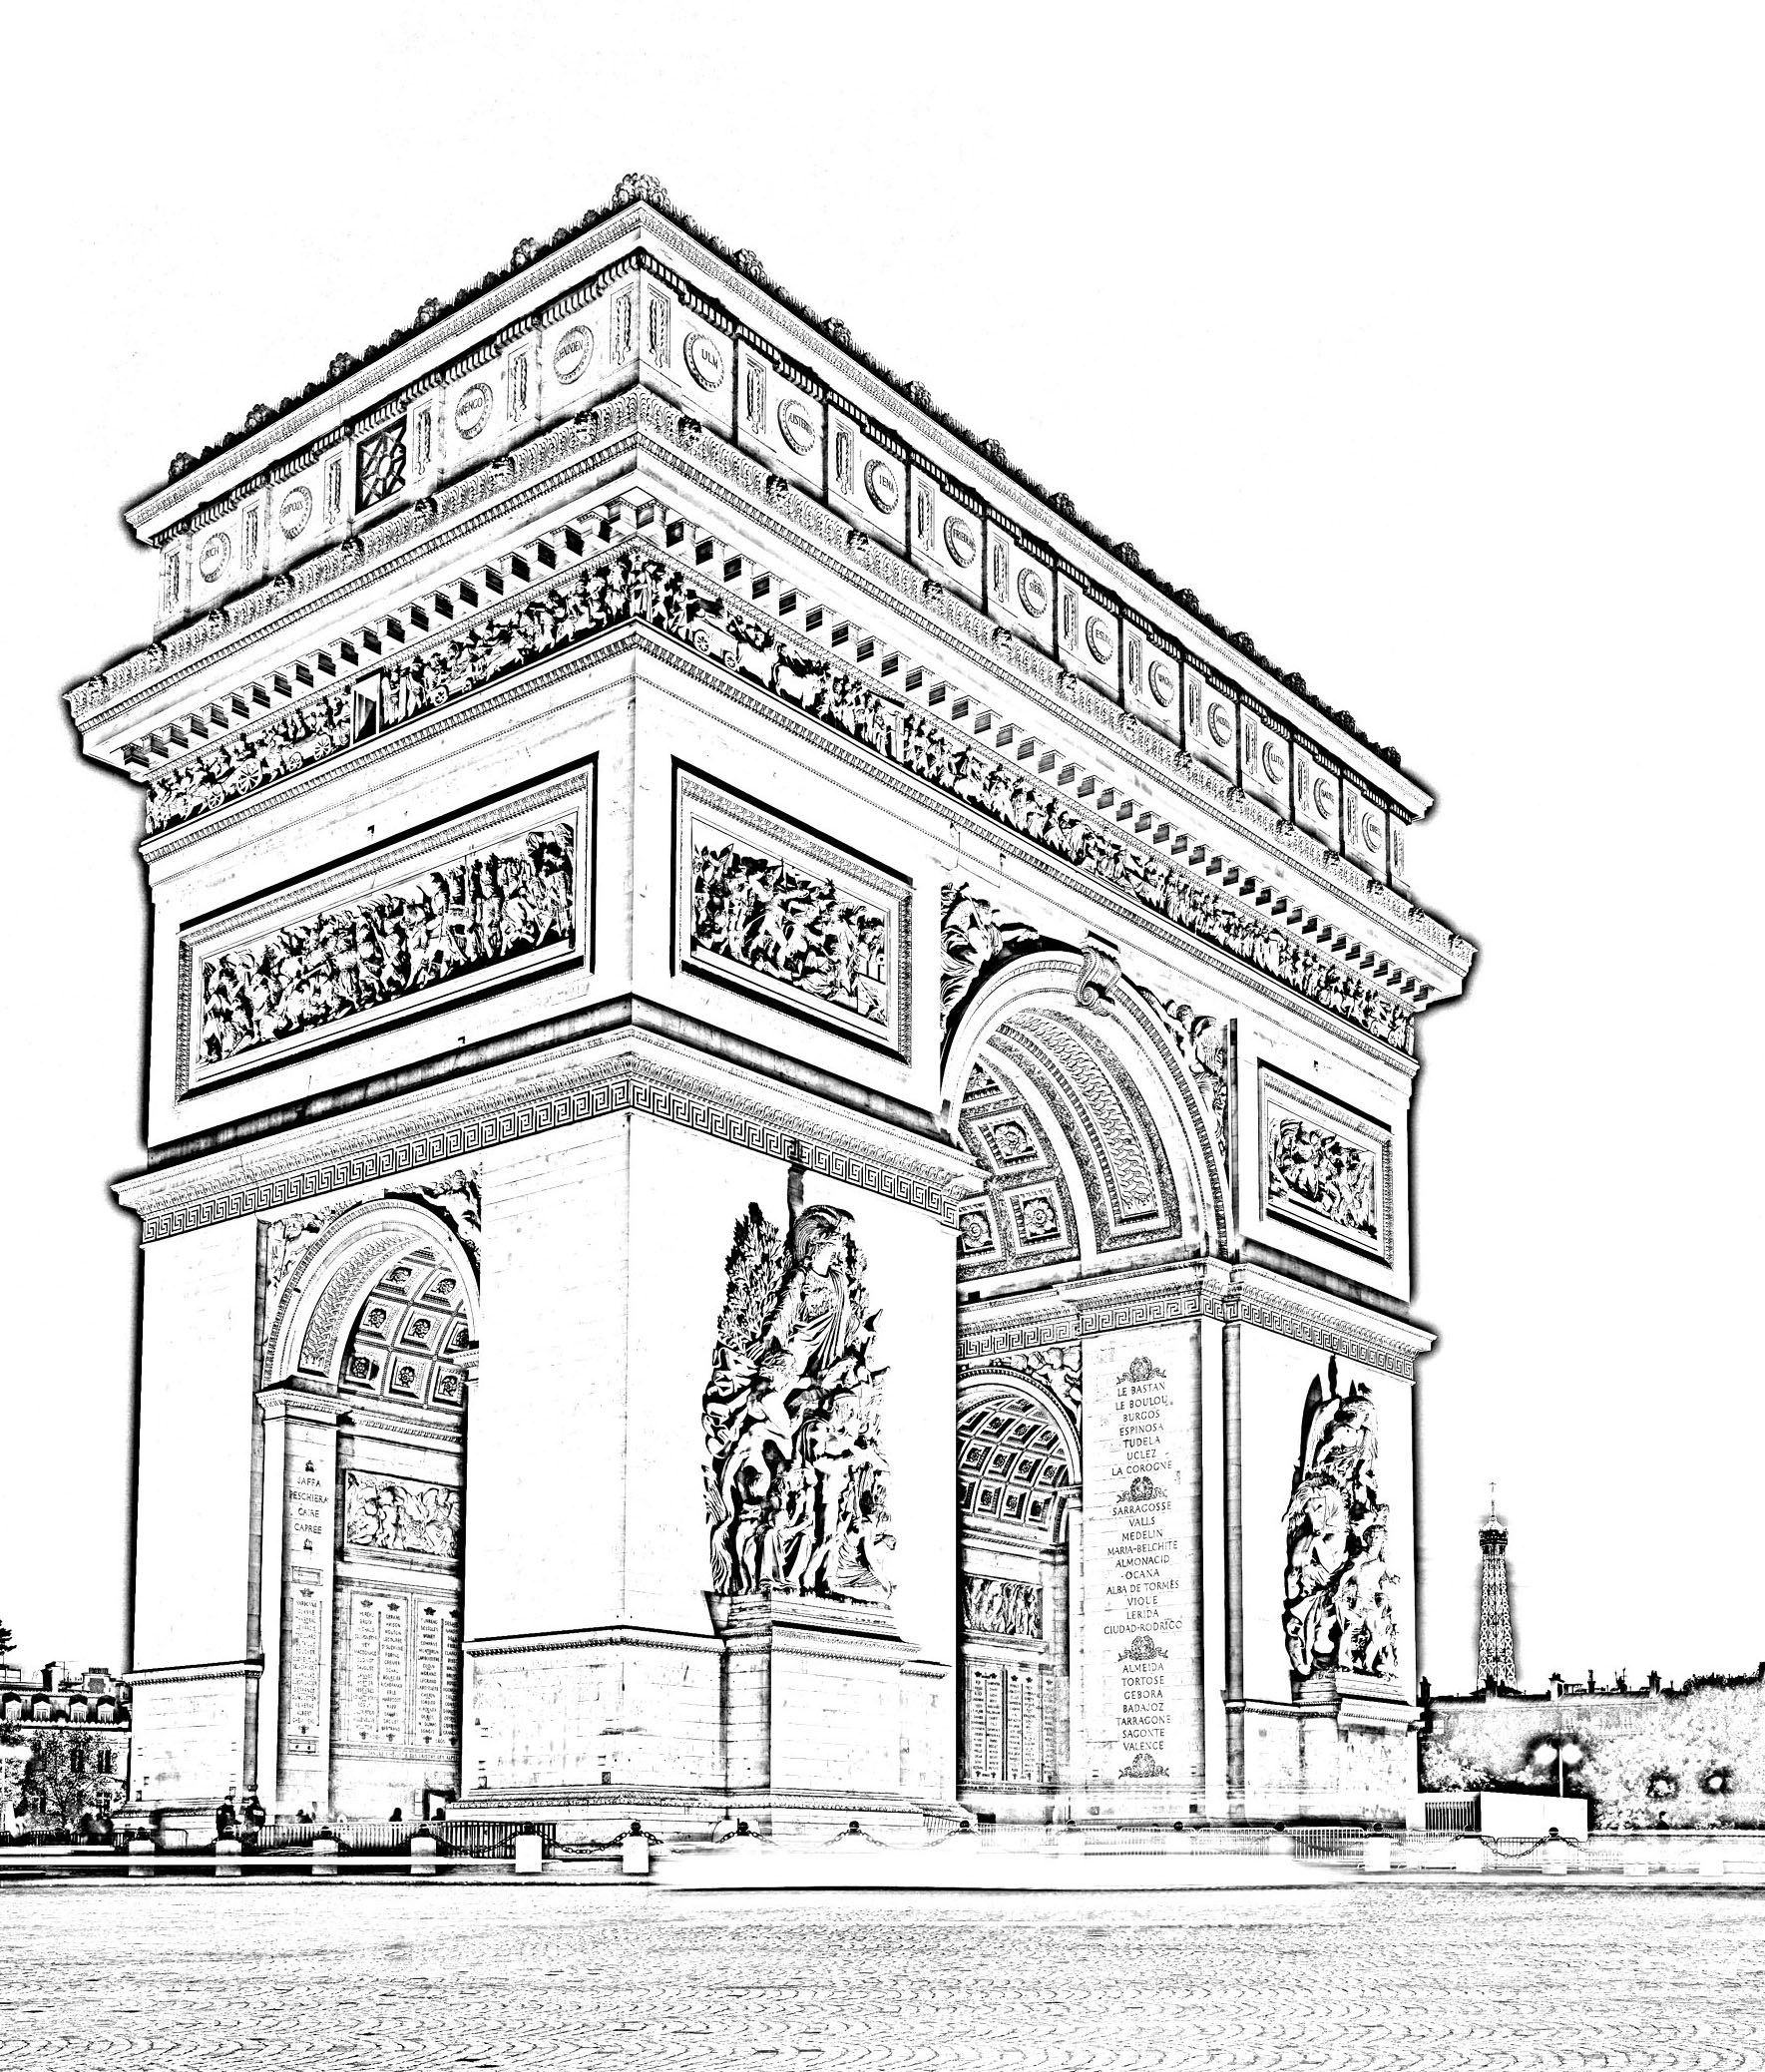 The Arc de Triomphe of Paris, capital of France, in High Definition and in black & white